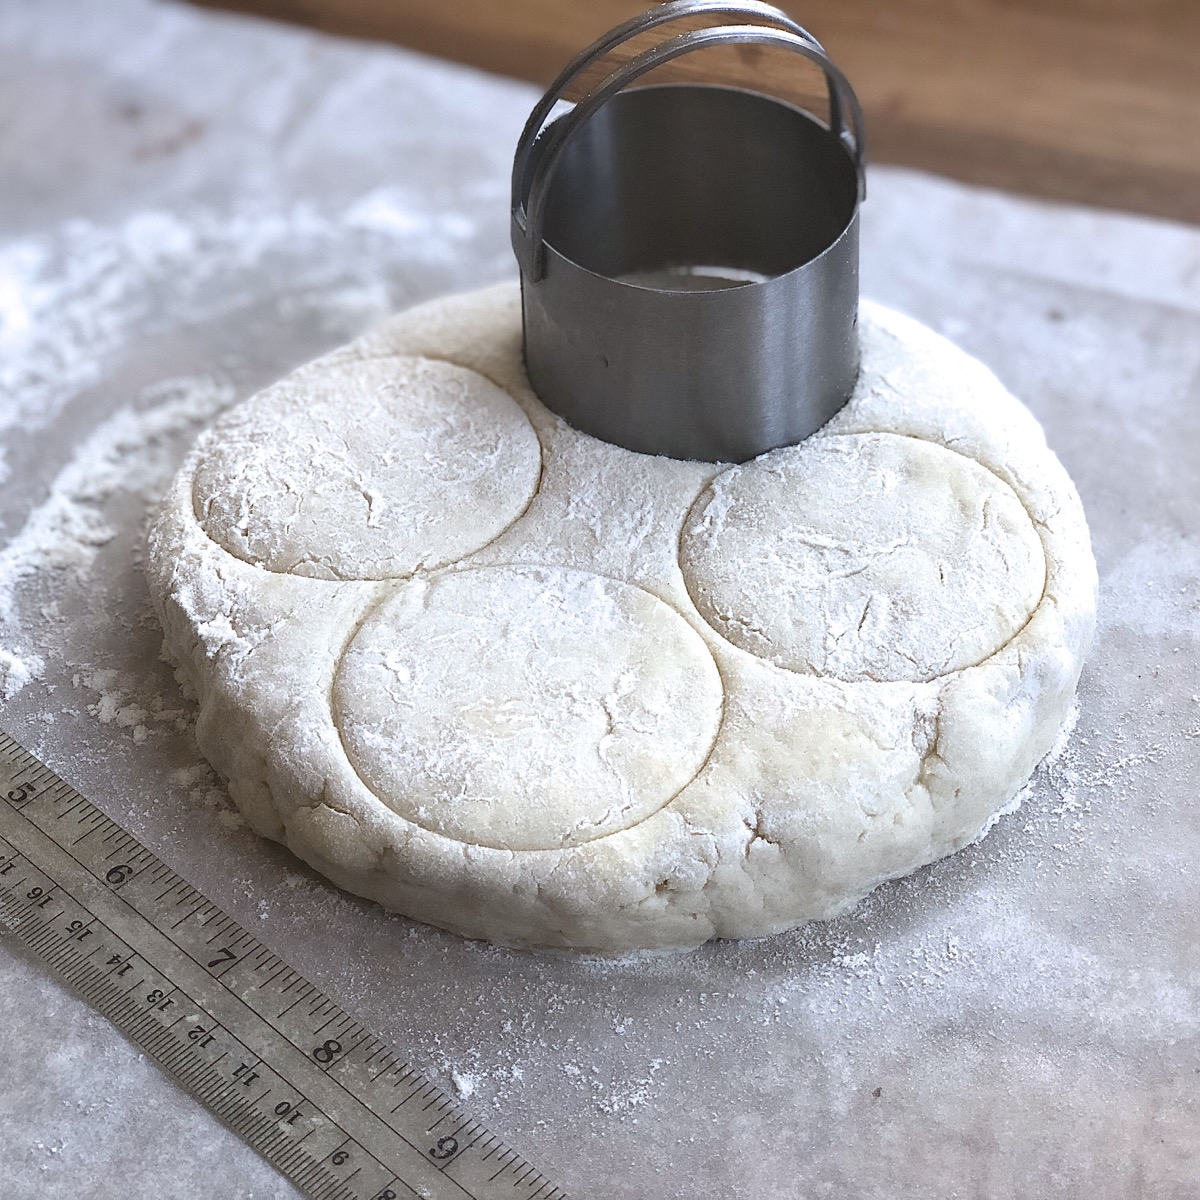 A 6" round of biscuit dough about to be cut with a biscuit cutter.